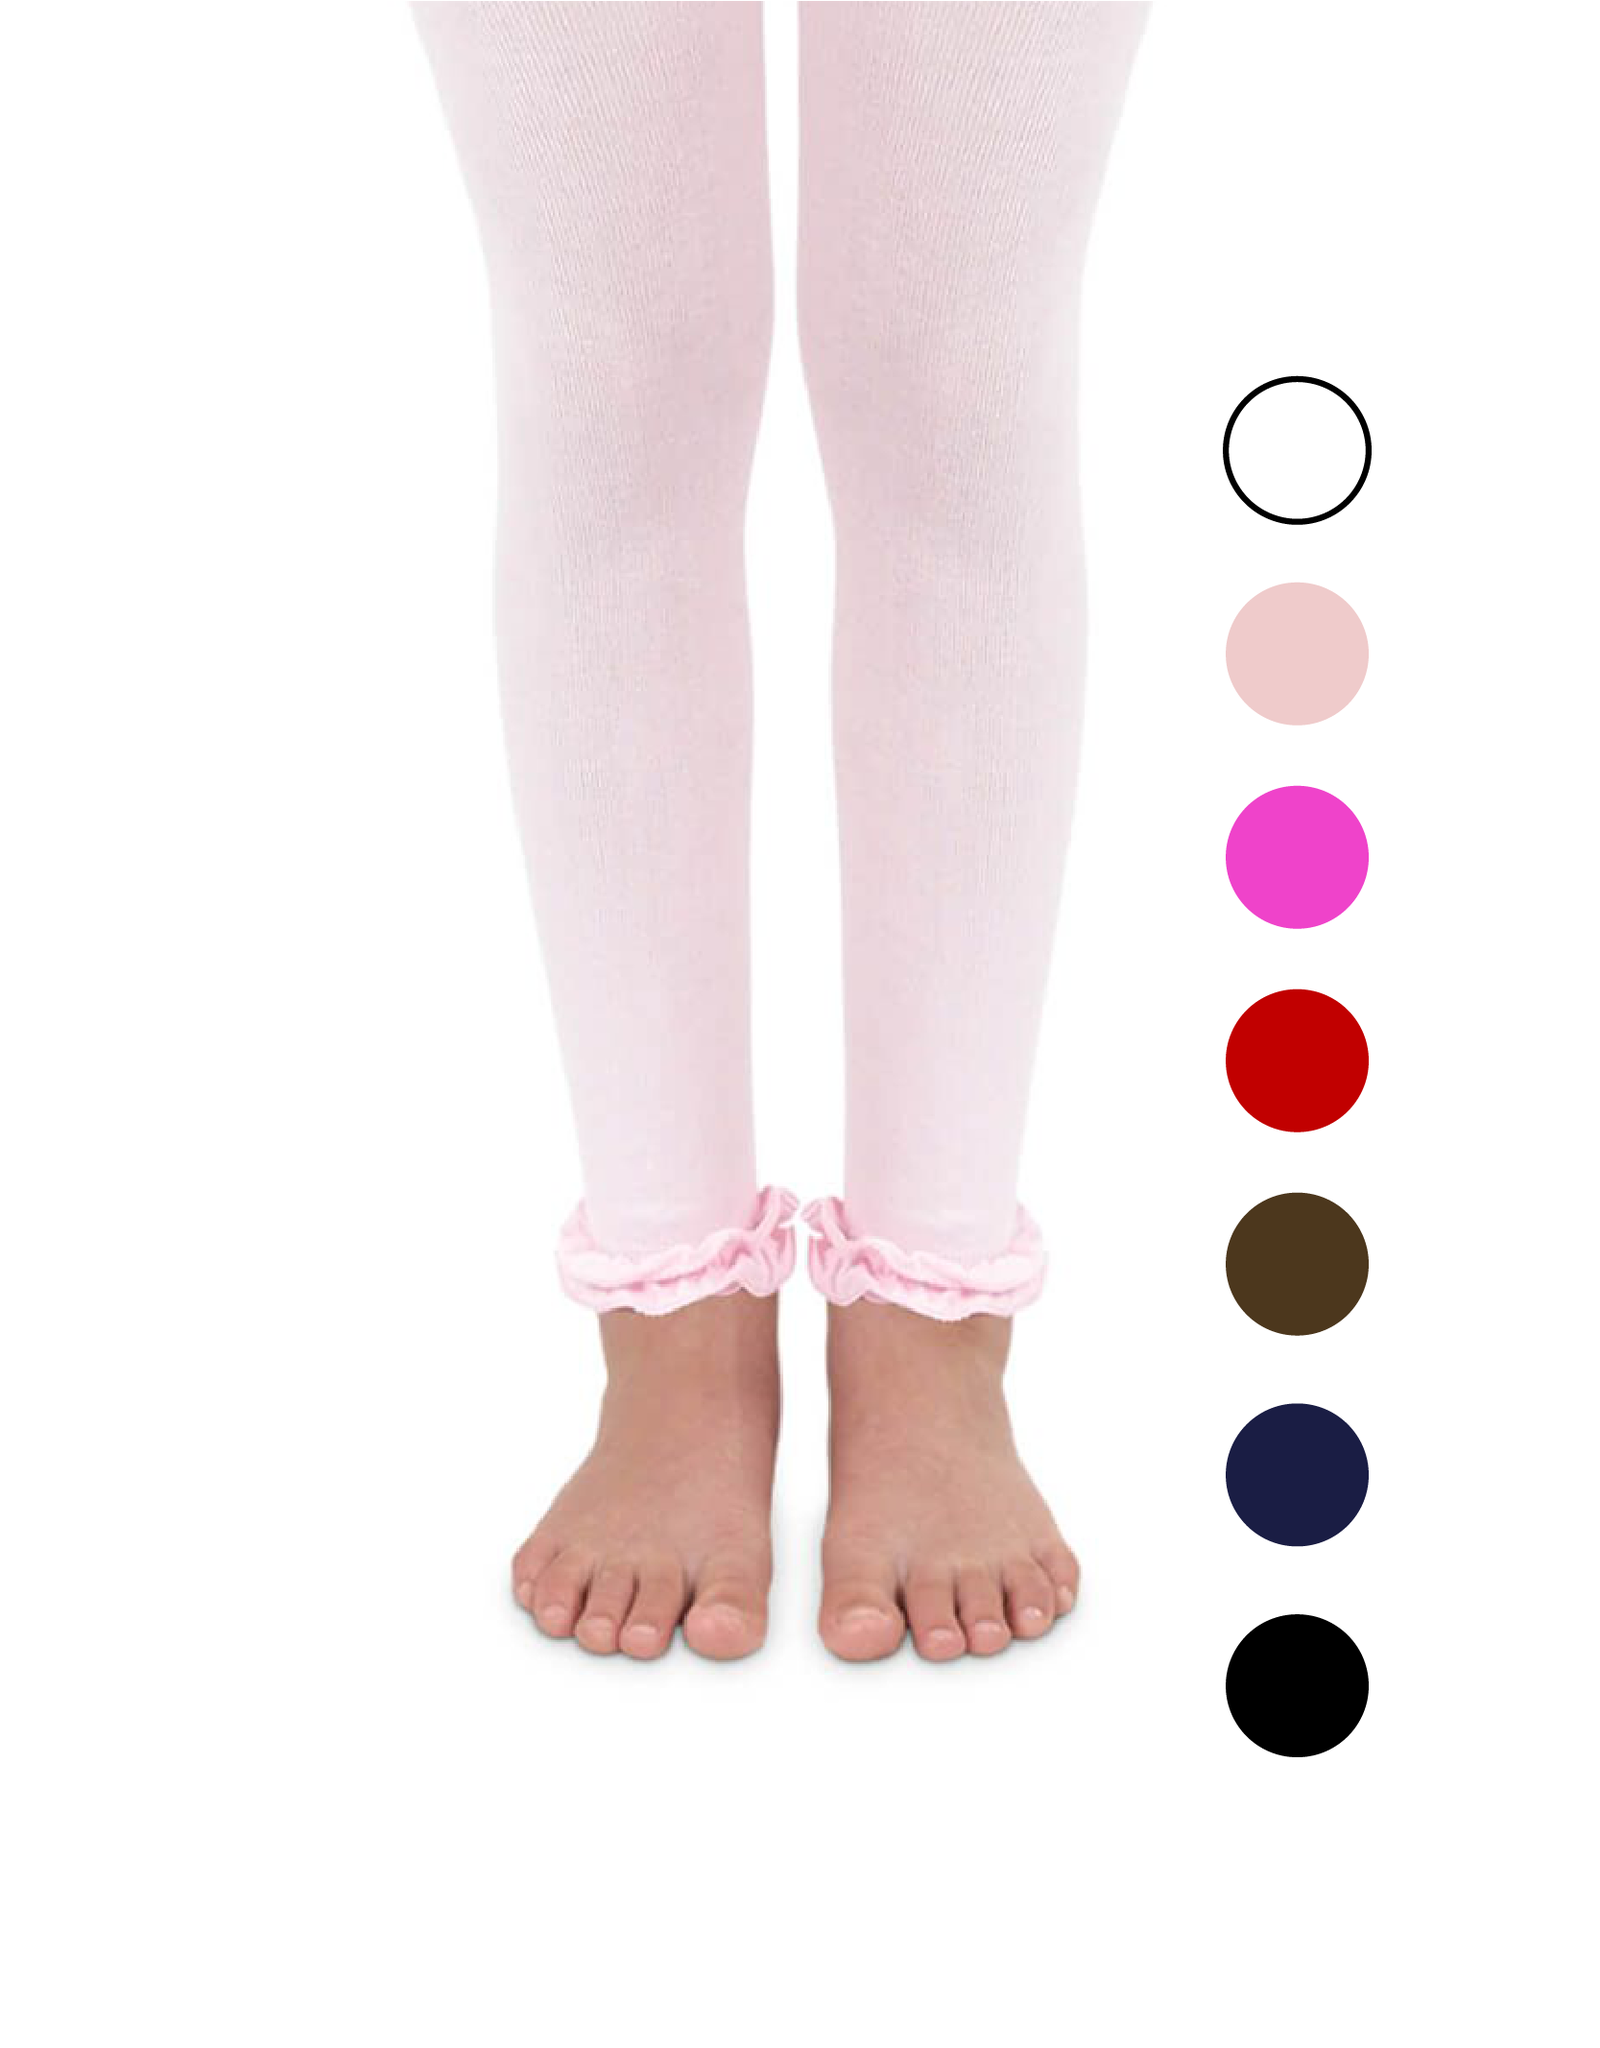 Plus Size Footless Tights - Black Opaque Comfort - ShopperBoard